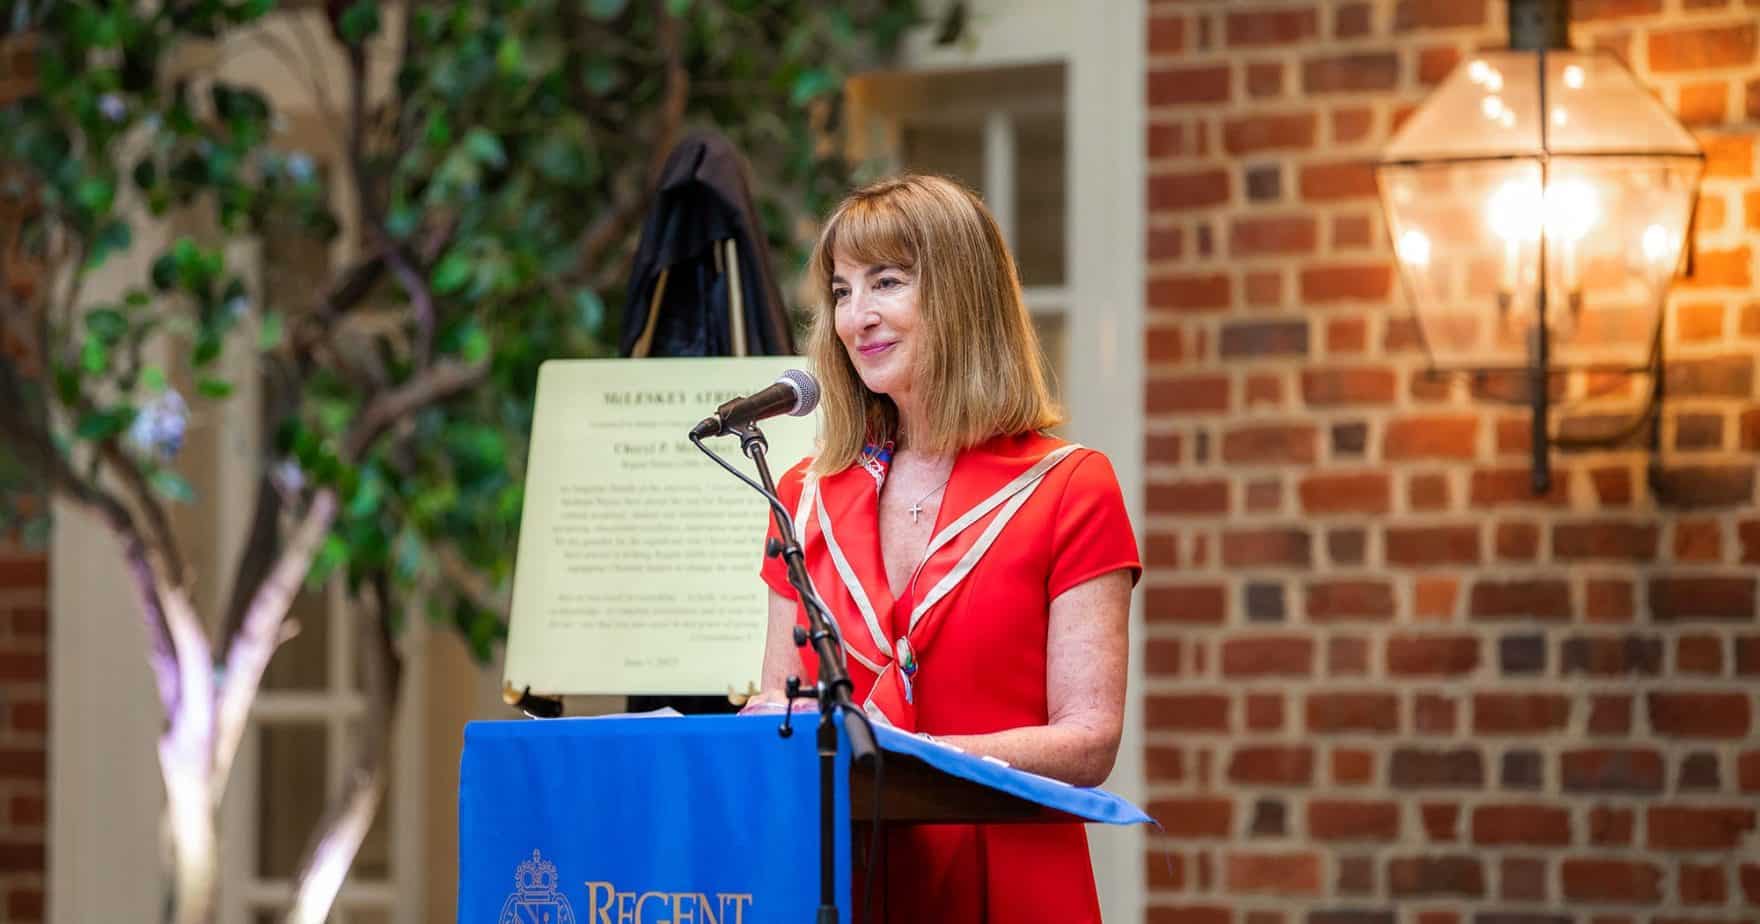 Cheryl P. McLeskey, in whose honor Regent University named its library atrium.